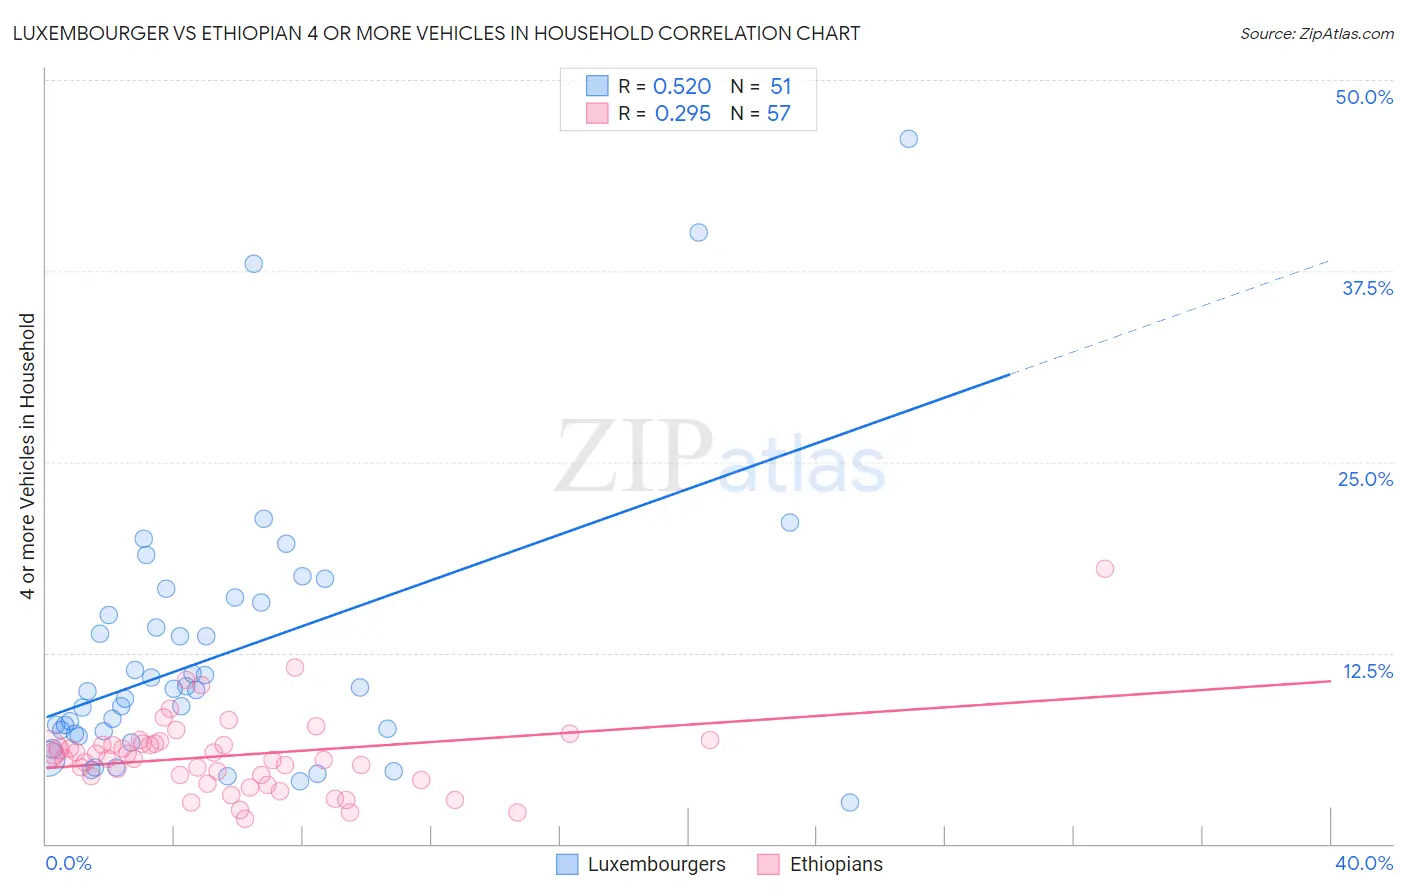 Luxembourger vs Ethiopian 4 or more Vehicles in Household